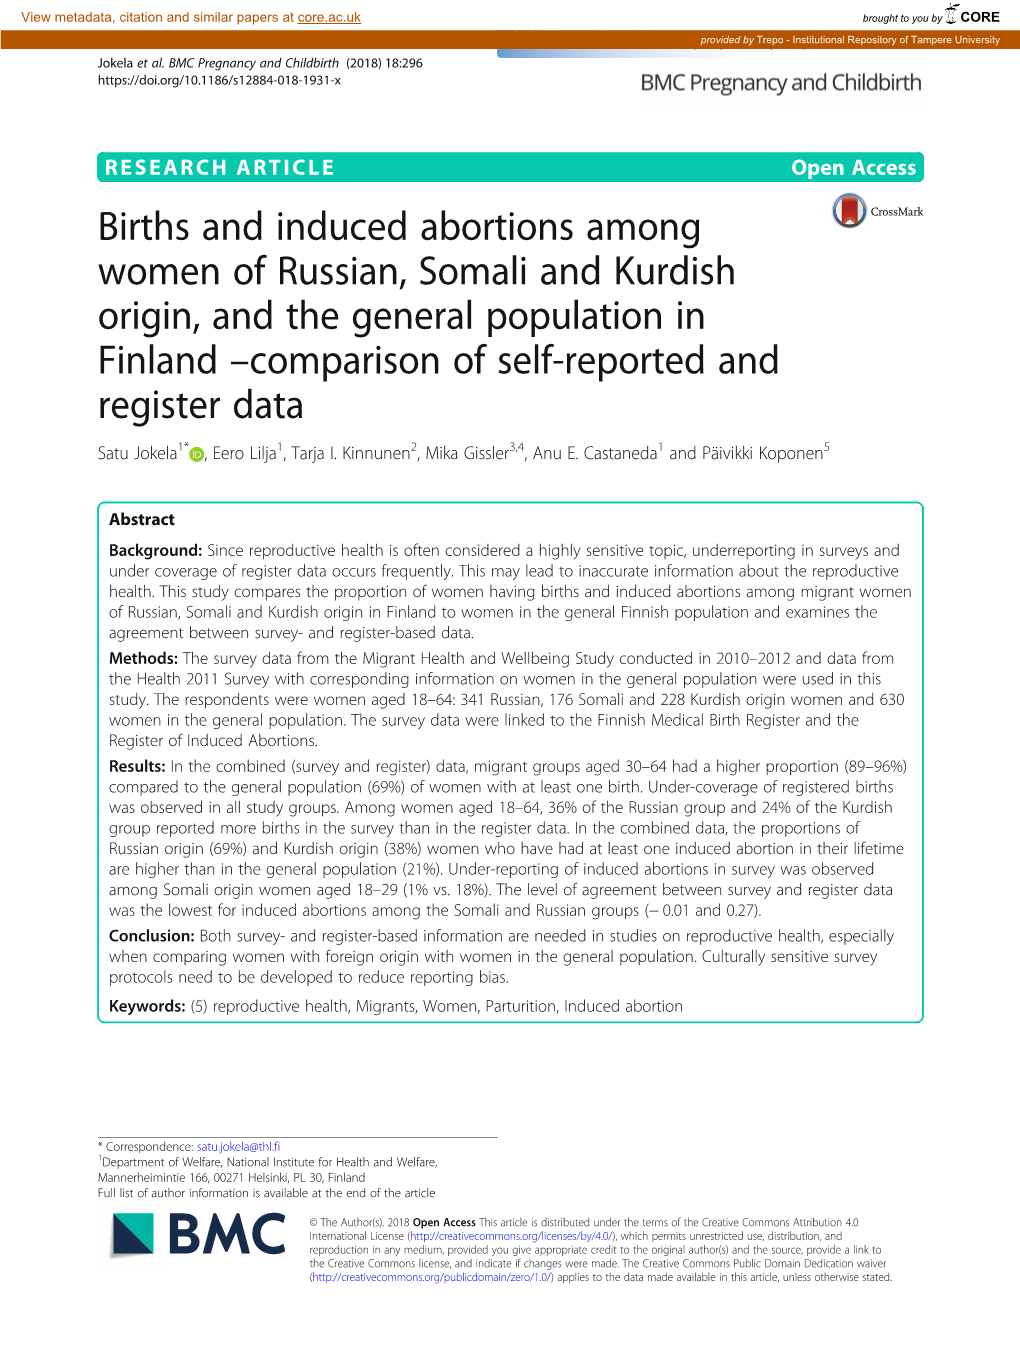 Births and Induced Abortions Among Women of Russian, Somali